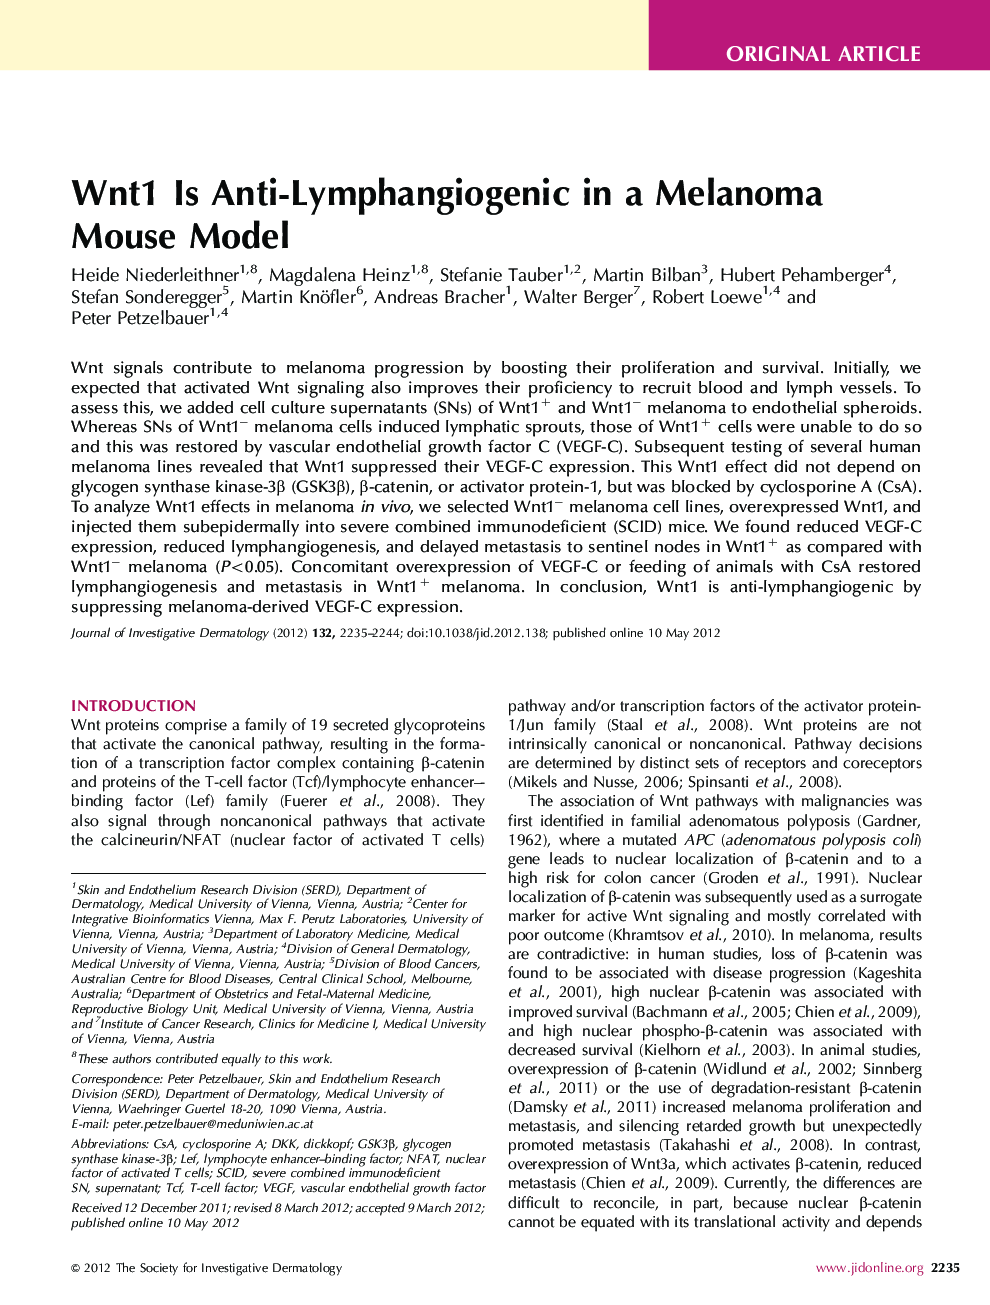 Wnt1 Is Anti-Lymphangiogenic in a Melanoma Mouse Model